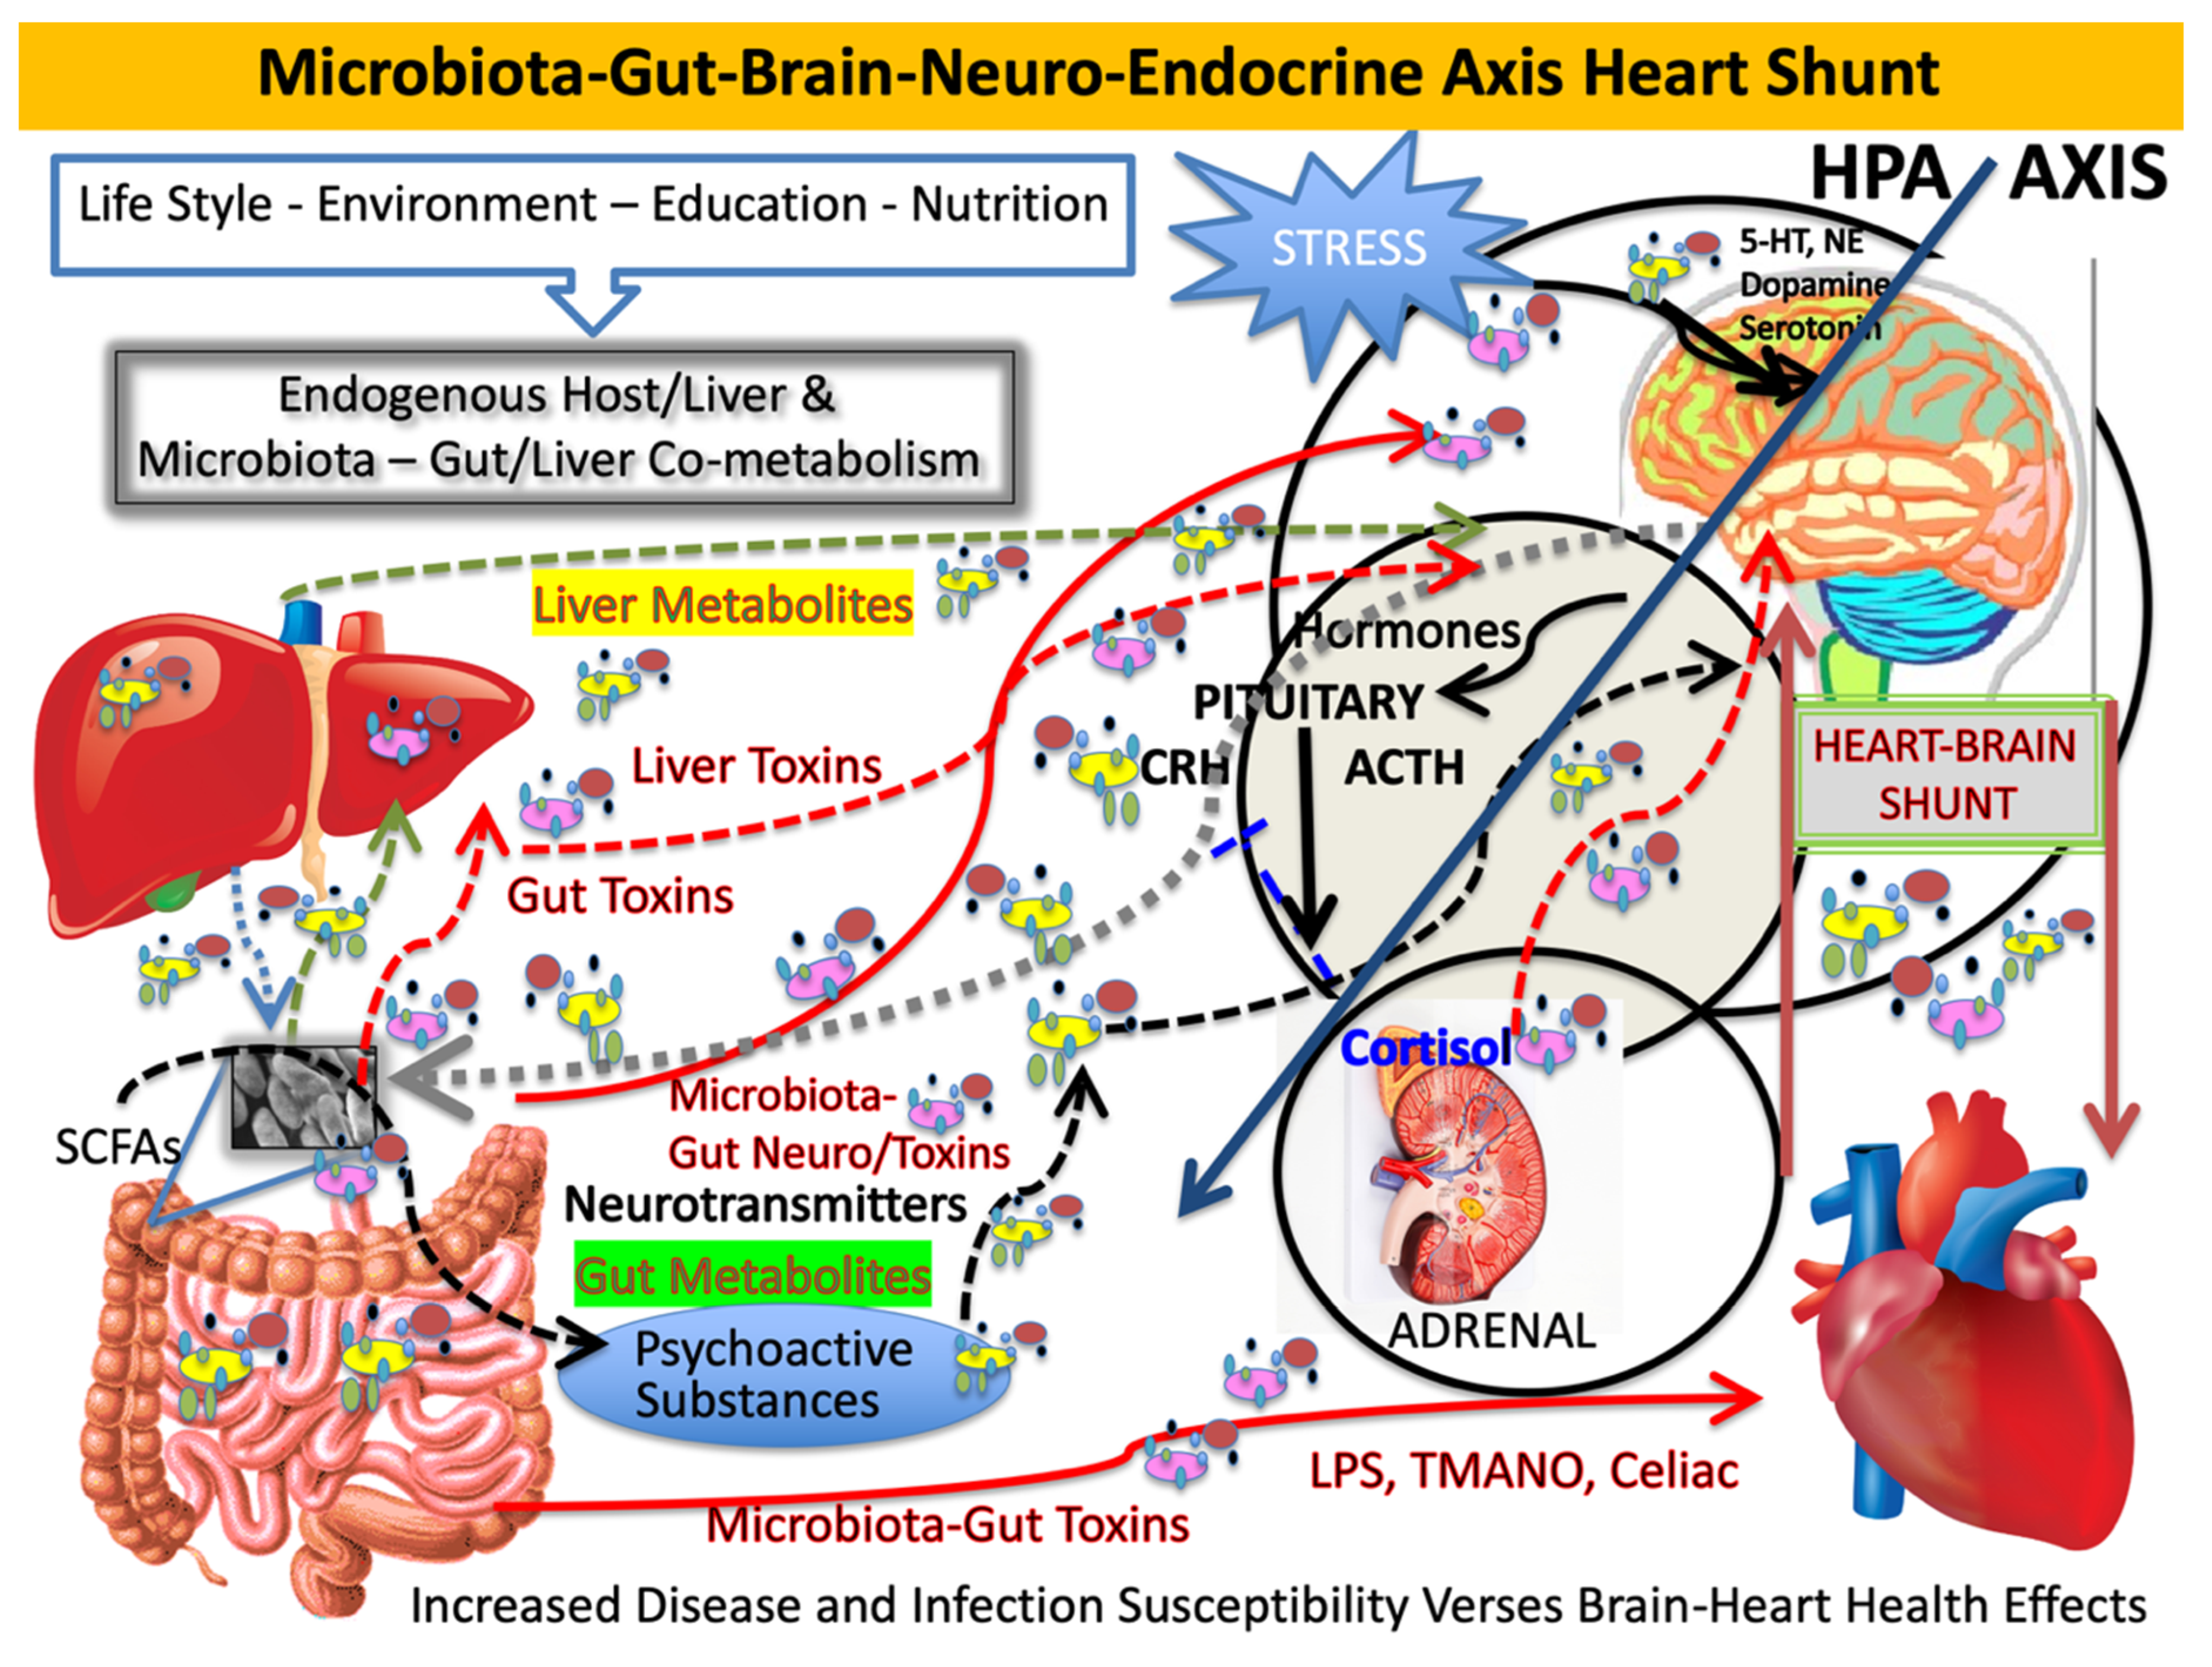 Microorganisms | Free Full-Text | The Microbiota–Gut–Brain Axis–Heart Shunt  Part II: Prosaic Foods and the Brain–Heart Connection in Alzheimer Disease  | HTML